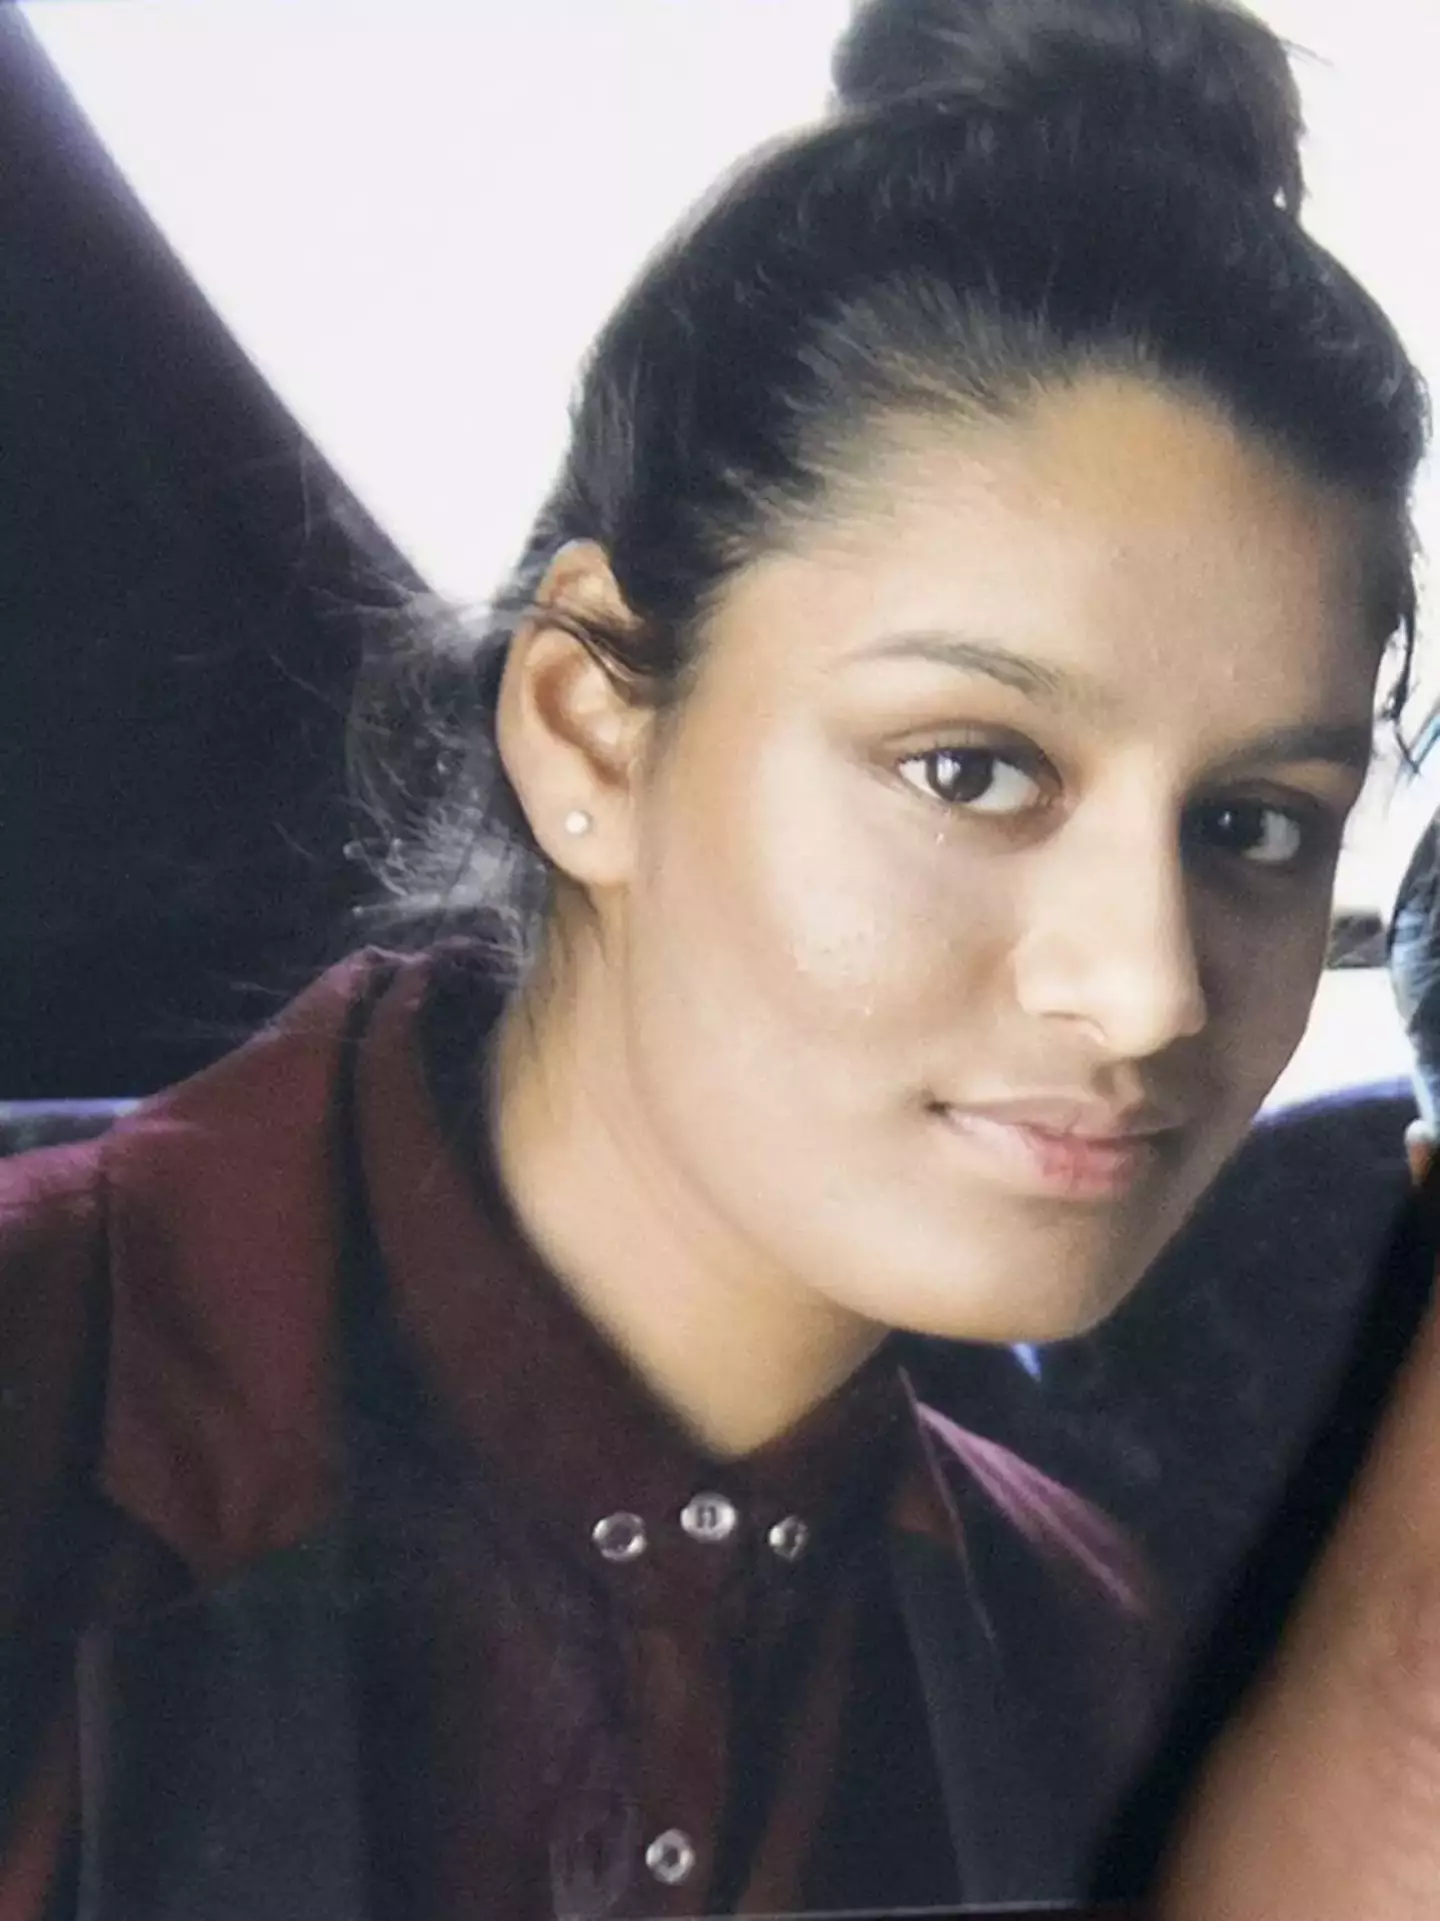 Shamima Begum left the UK back in 2015 to join Isis.